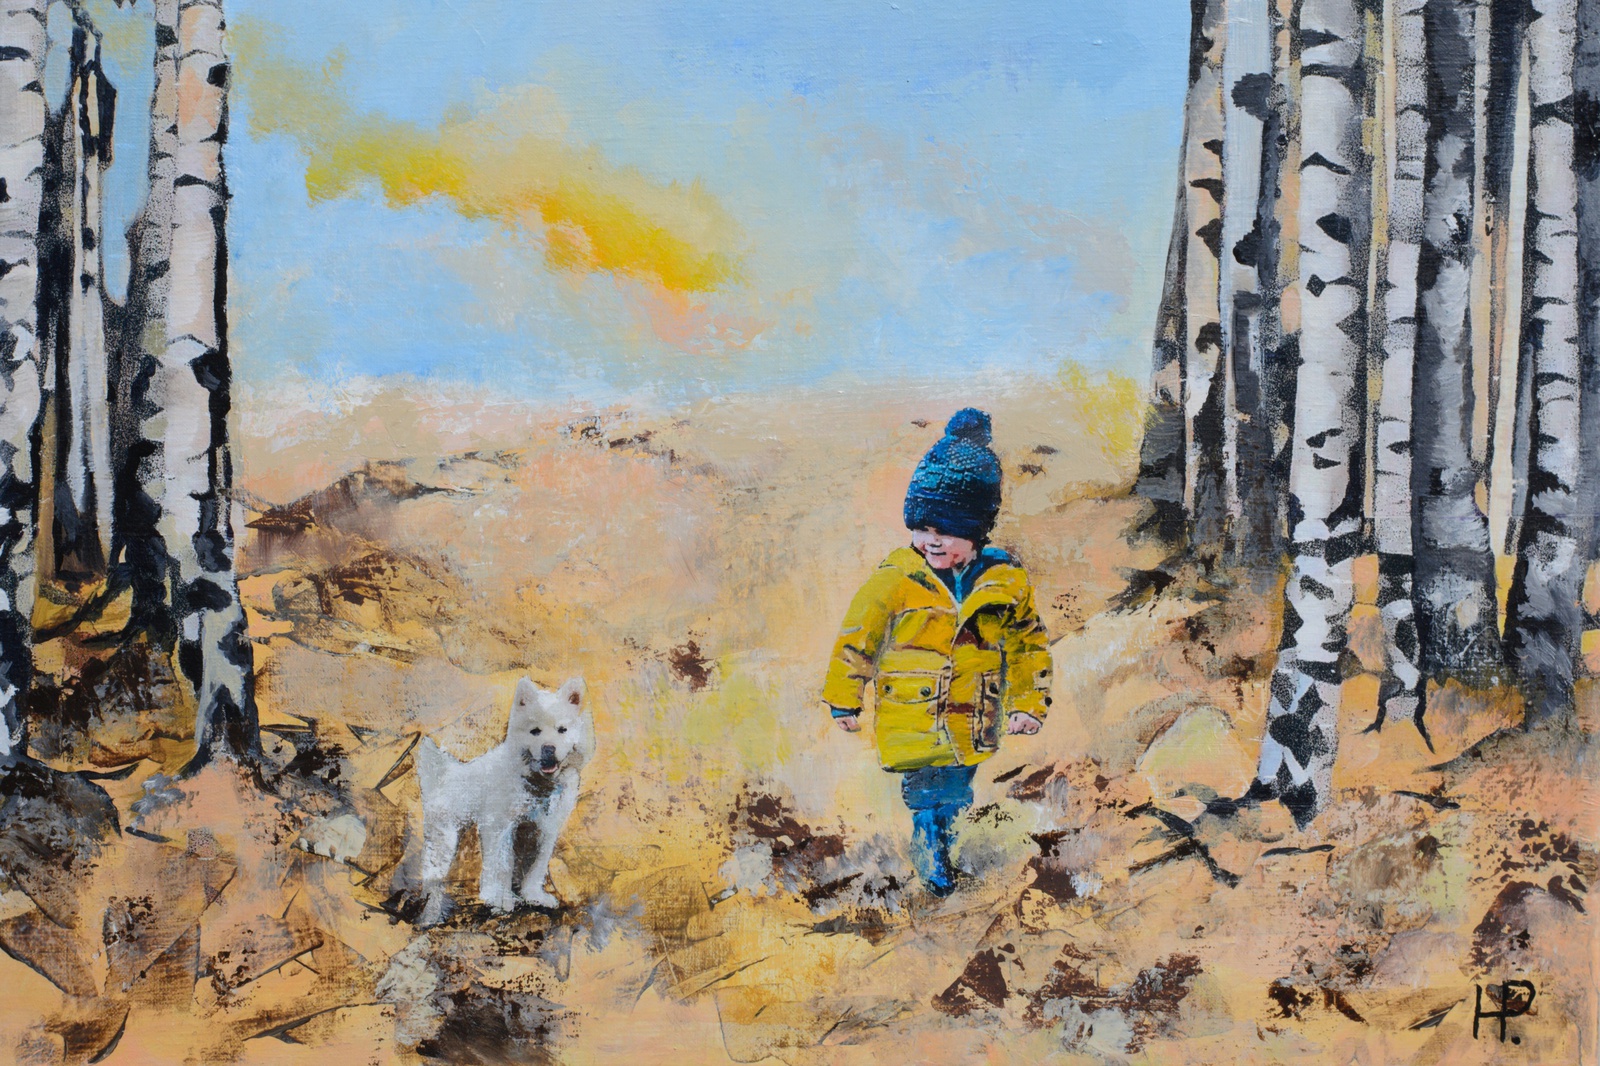 The boy, his dog and the birch